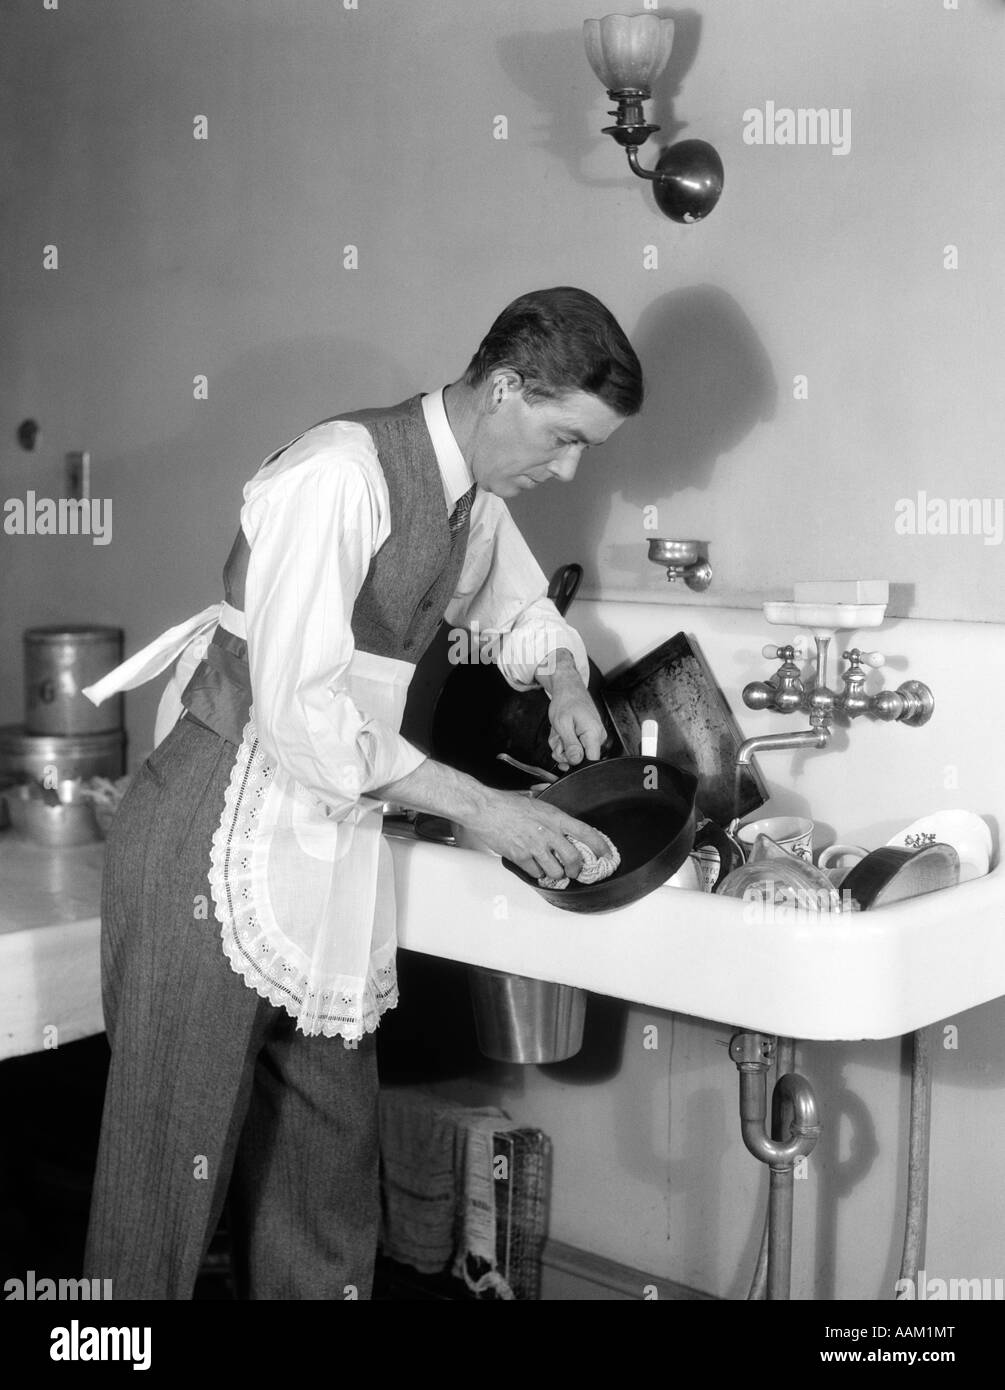 1930s MAN DRESSED IN SHIRT TIE VEST & APRON BENT OVER A SINK FULL OF DISHES CLEANING AN IRON SKILLET WITH A DISHCLOTH Stock Photo